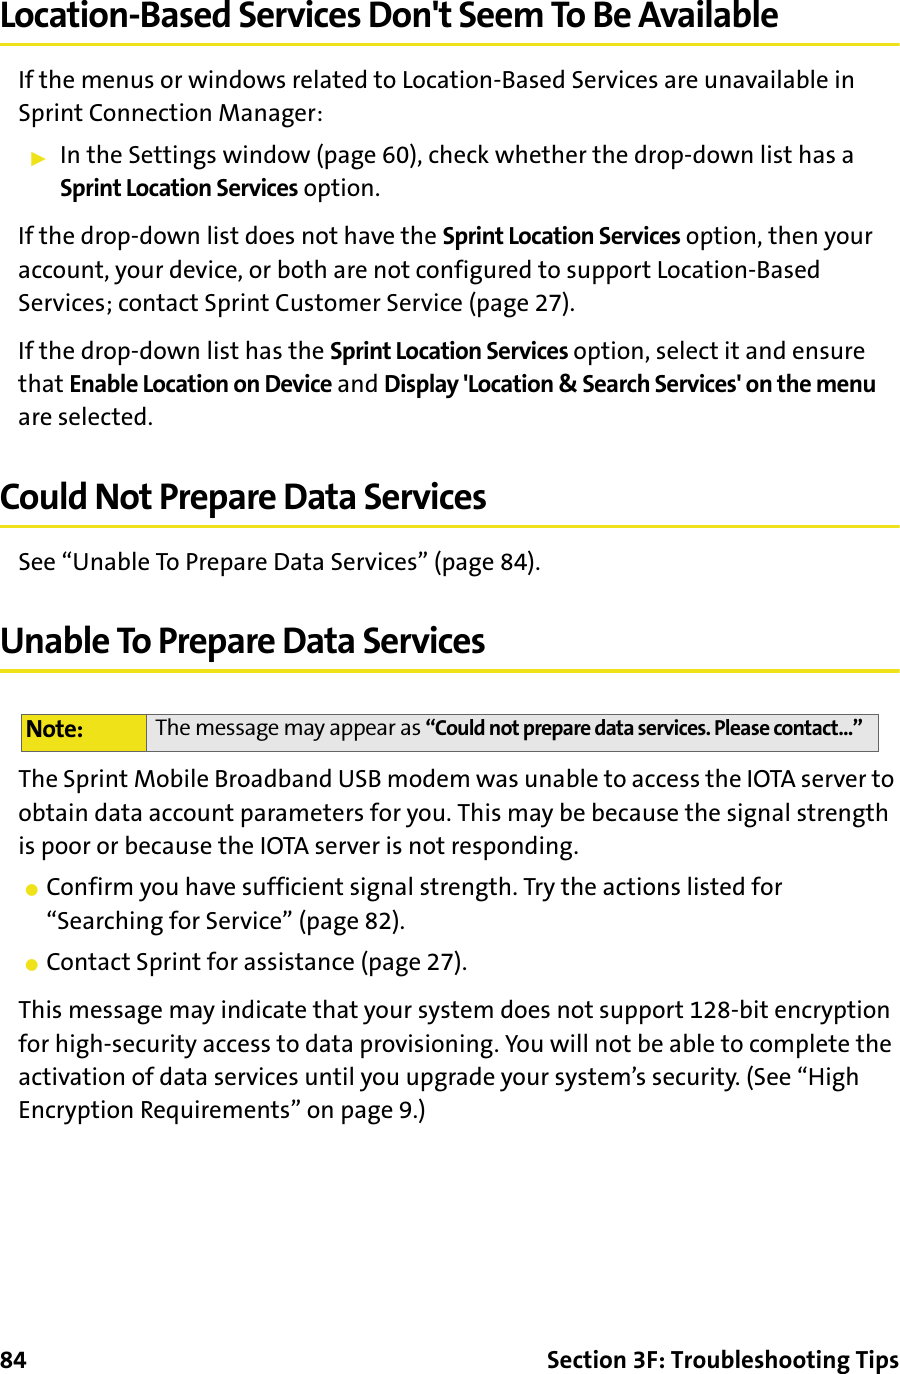 84 Section 3F: Troubleshooting TipsLocation-Based Services Don&apos;t Seem To Be AvailableIf the menus or windows related to Location-Based Services are unavailable in Sprint Connection Manager:䊳In the Settings window (page 60), check whether the drop-down list has a Sprint Location Services option.If the drop-down list does not have the Sprint Location Services option, then your account, your device, or both are not configured to support Location-Based Services; contact Sprint Customer Service (page 27).If the drop-down list has the Sprint Location Services option, select it and ensure that Enable Location on Device and Display &apos;Location &amp; Search Services&apos; on the menu are selected.Could Not Prepare Data ServicesSee “Unable To Prepare Data Services” (page 84).Unable To Prepare Data ServicesThe Sprint Mobile Broadband USB modem was unable to access the IOTA server to obtain data account parameters for you. This may be because the signal strength is poor or because the IOTA server is not responding.䢇Confirm you have sufficient signal strength. Try the actions listed for “Searching for Service” (page 82).䢇Contact Sprint for assistance (page 27).This message may indicate that your system does not support 128-bit encryption for high-security access to data provisioning. You will not be able to complete the activation of data services until you upgrade your system’s security. (See “High Encryption Requirements” on page 9.)Note: The message may appear as “Could not prepare data services. Please contact...”